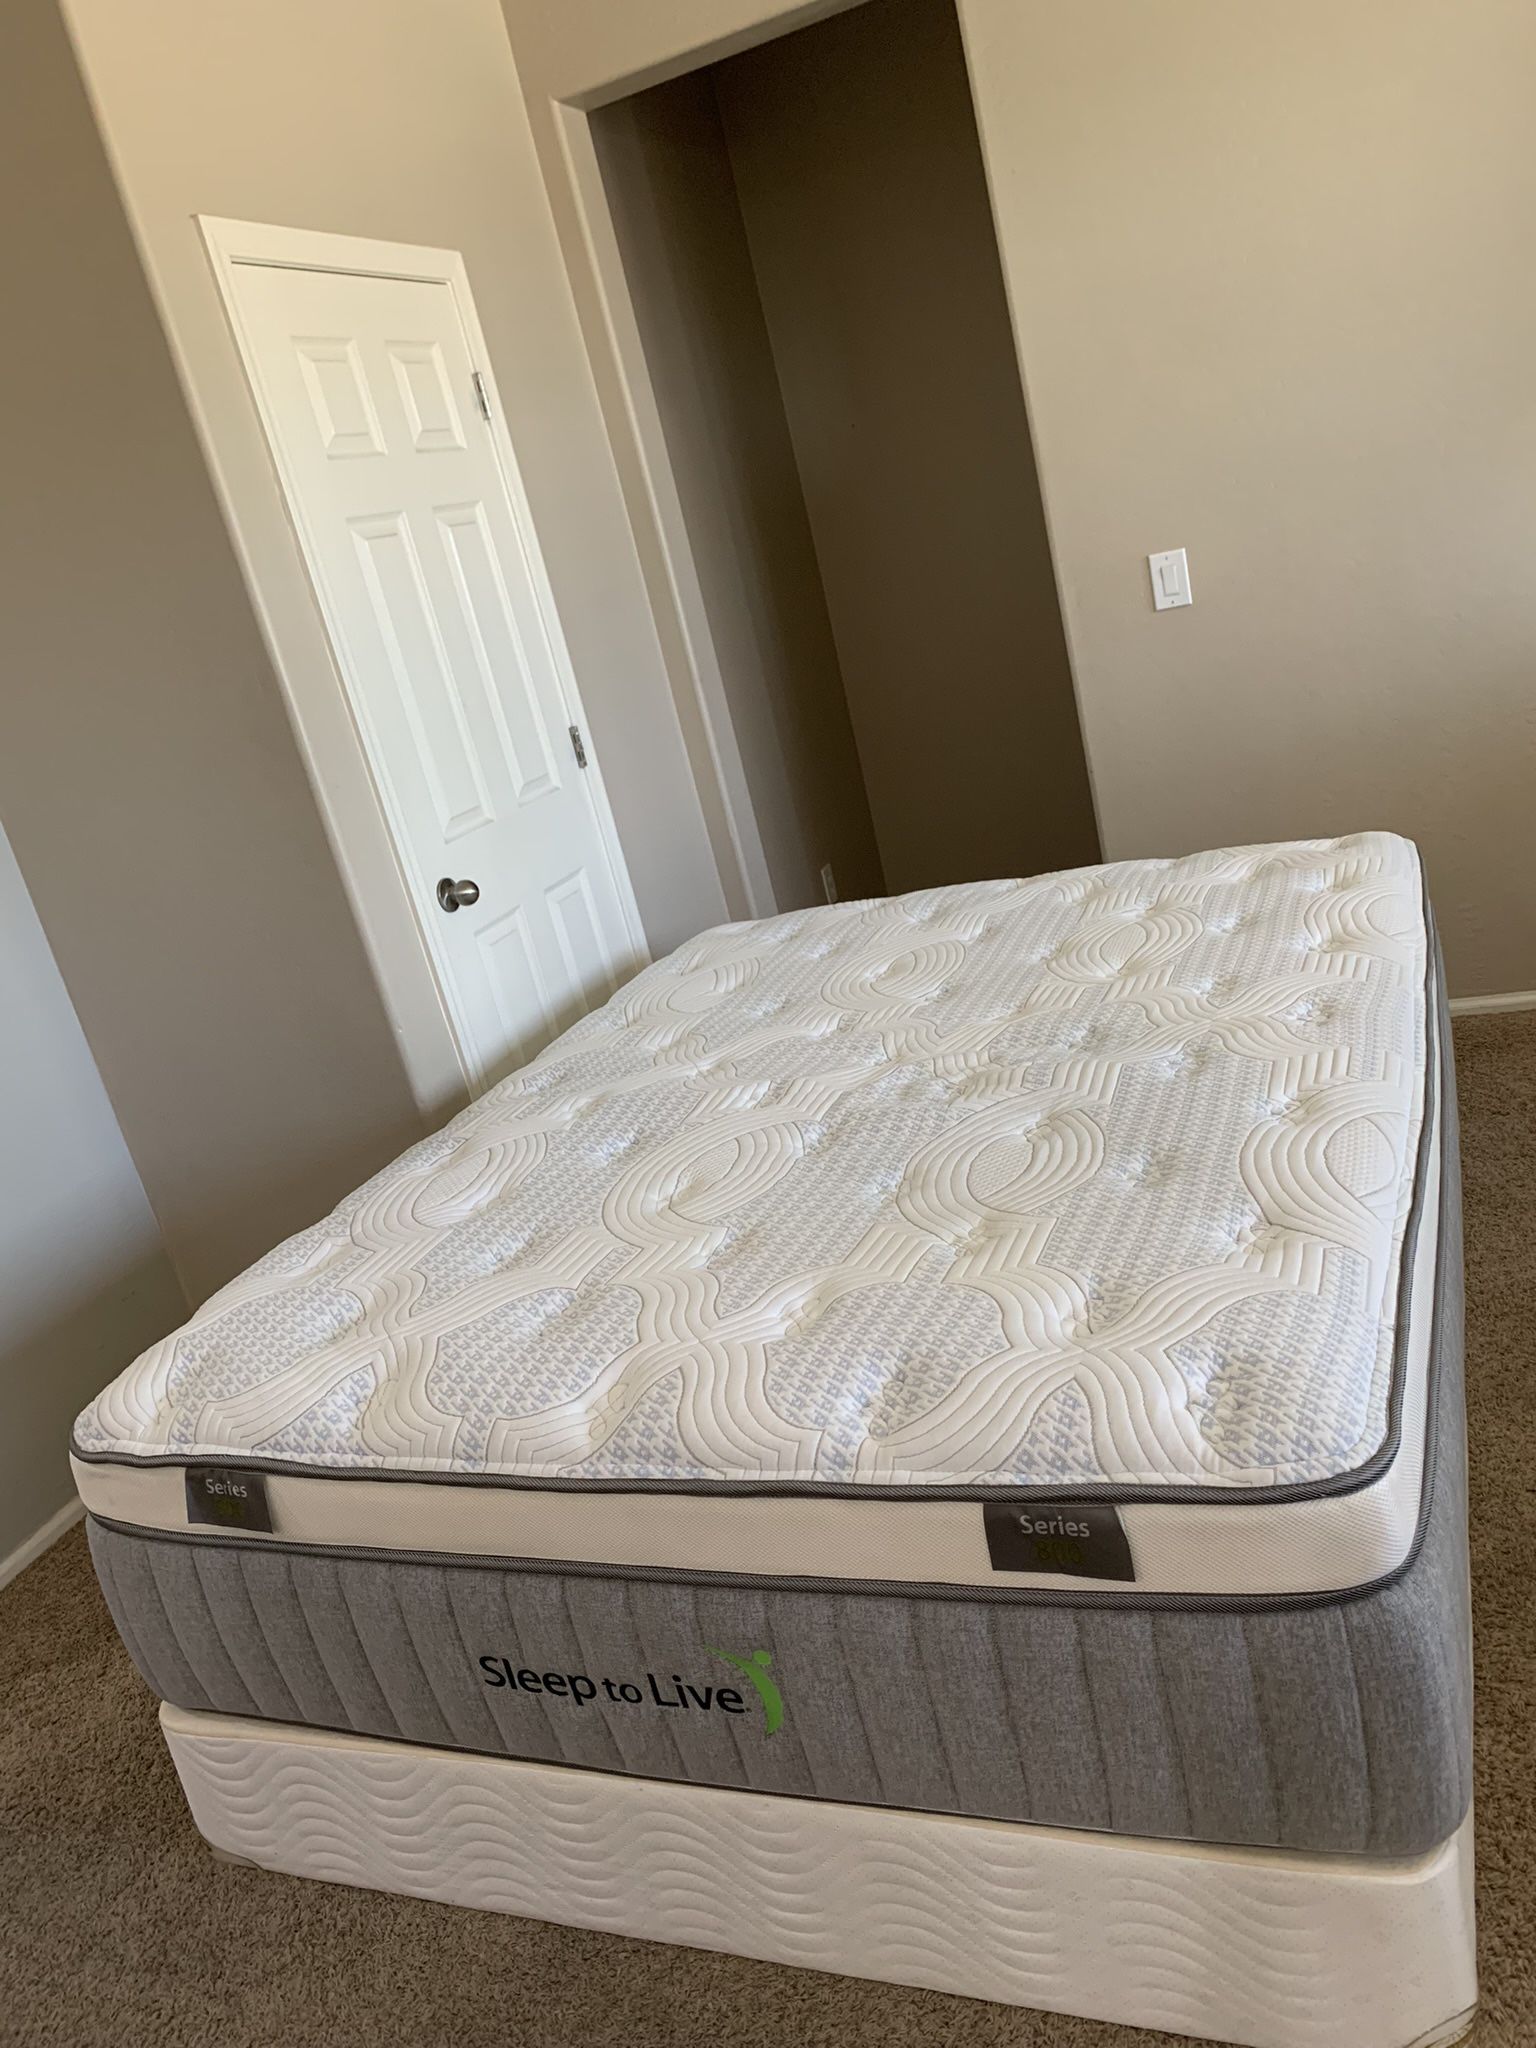 QUEEN KINGSDOWN MATTRESS AND FREE BOX SPRING 